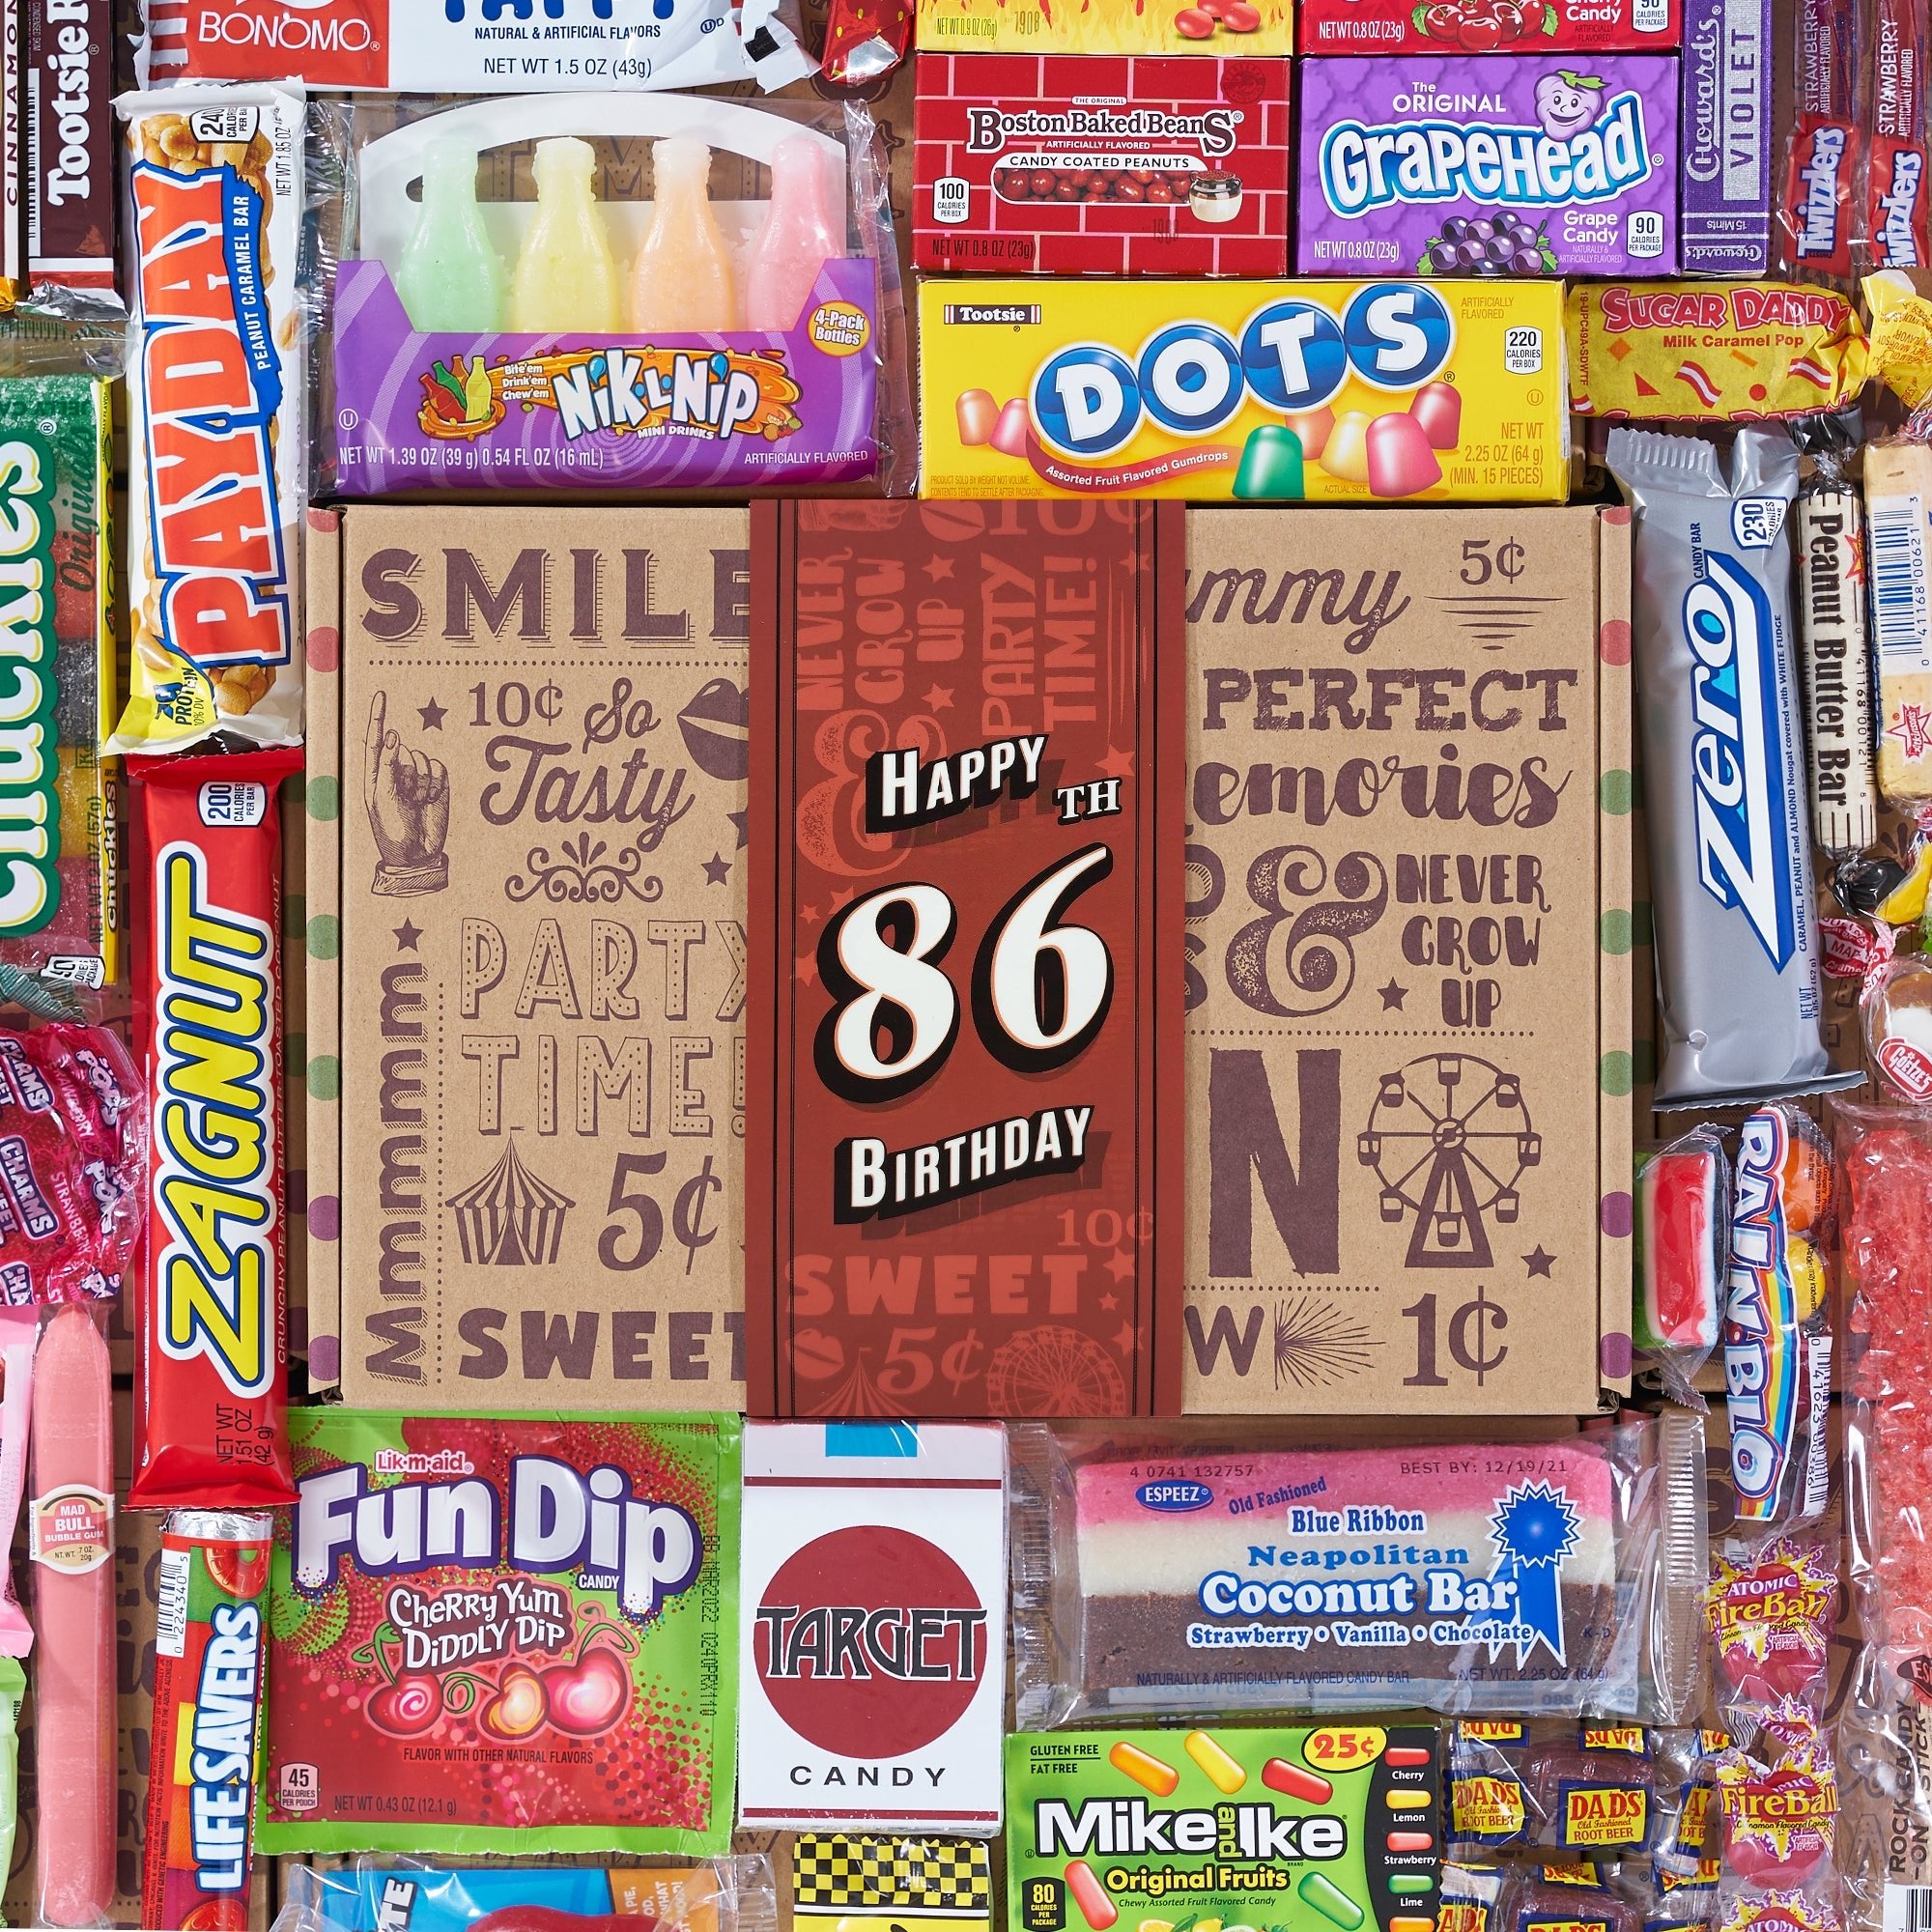 86th Birthday Retro Candy Gift - Vintage Candy Co.